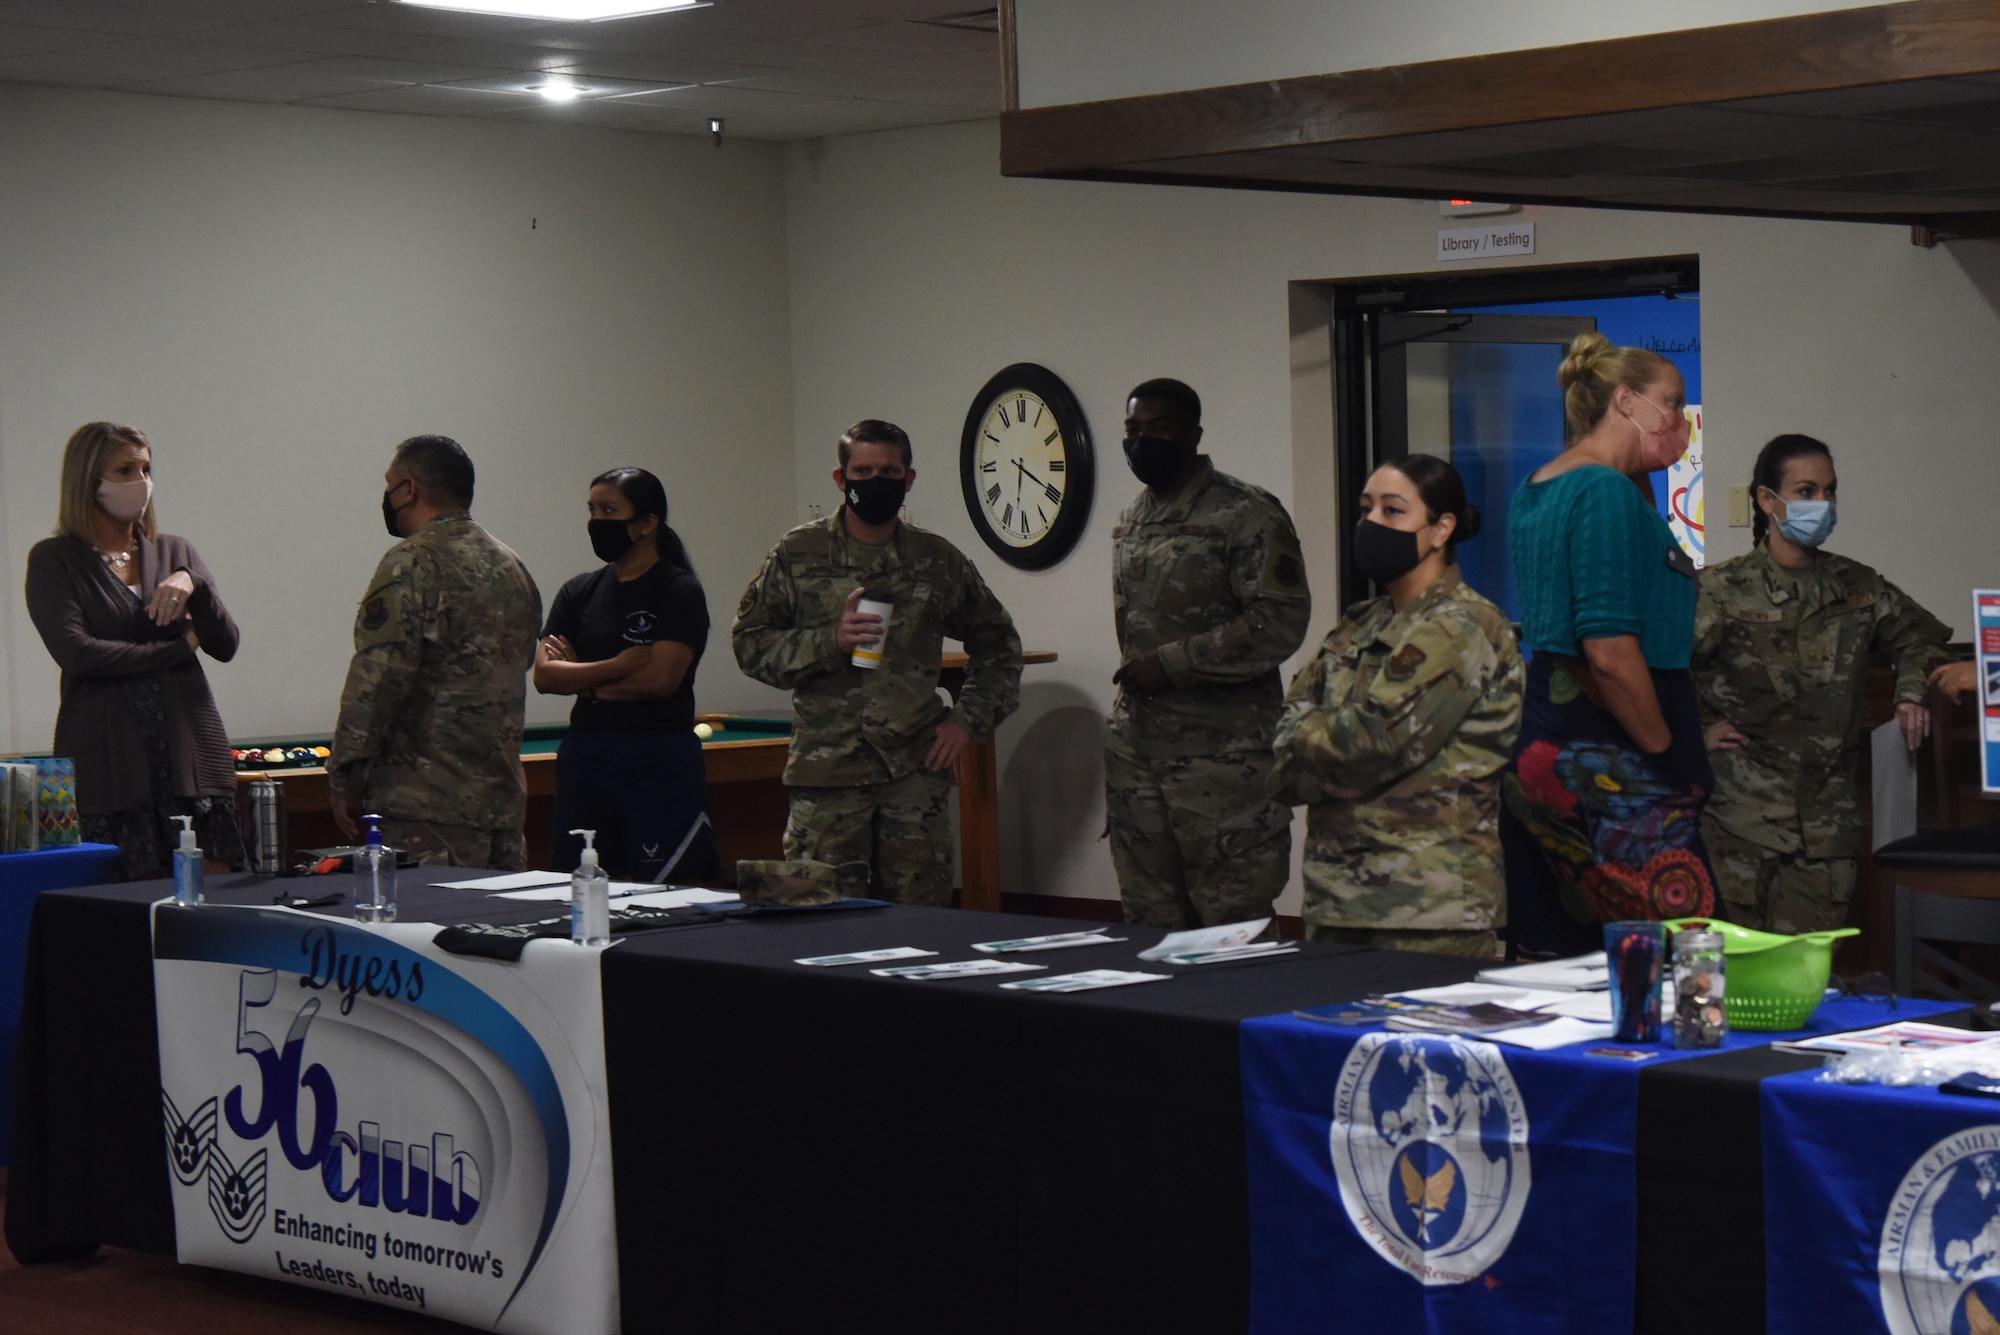 Members of various Team Dyess organizations set up booths to share the opportunities they provide for new Airmen at Dyess Air Force Base, Texas, Sept. 1, 2021.